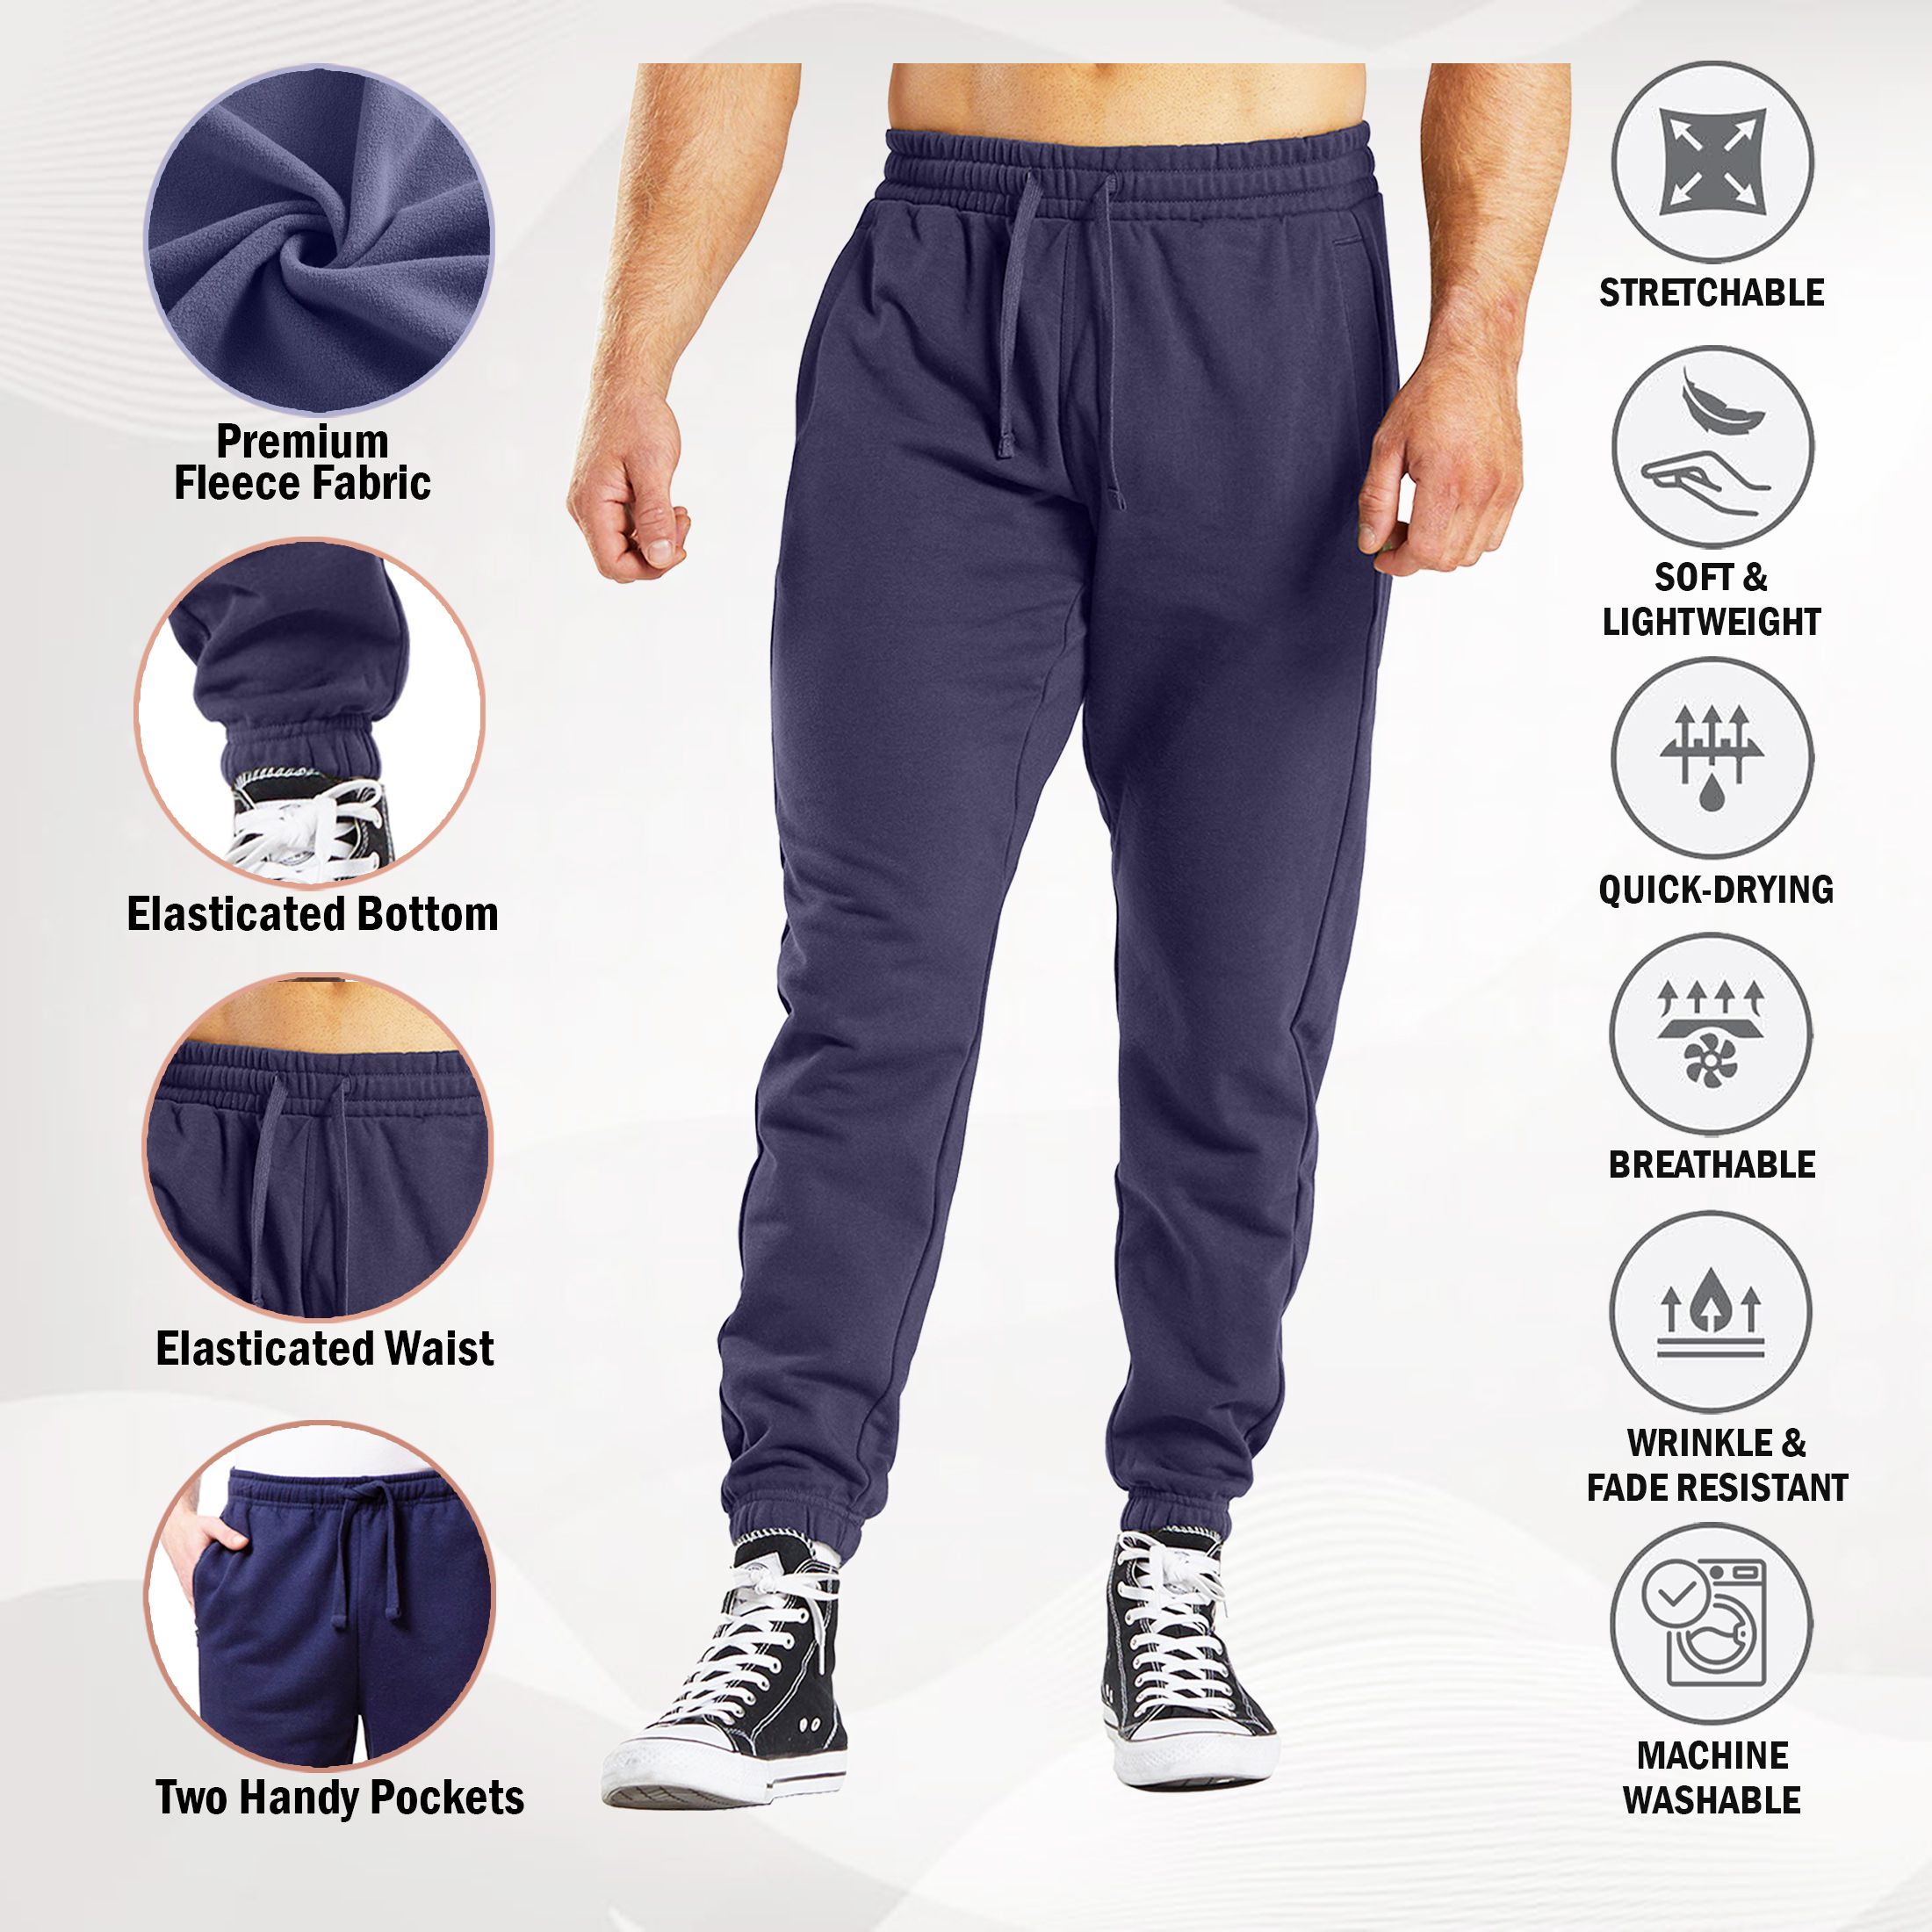 3-Pack: Men's Casual Fleece-Lined Elastic Bottom Sweatpants Jogger Pants With Pockets - Stripes, Large